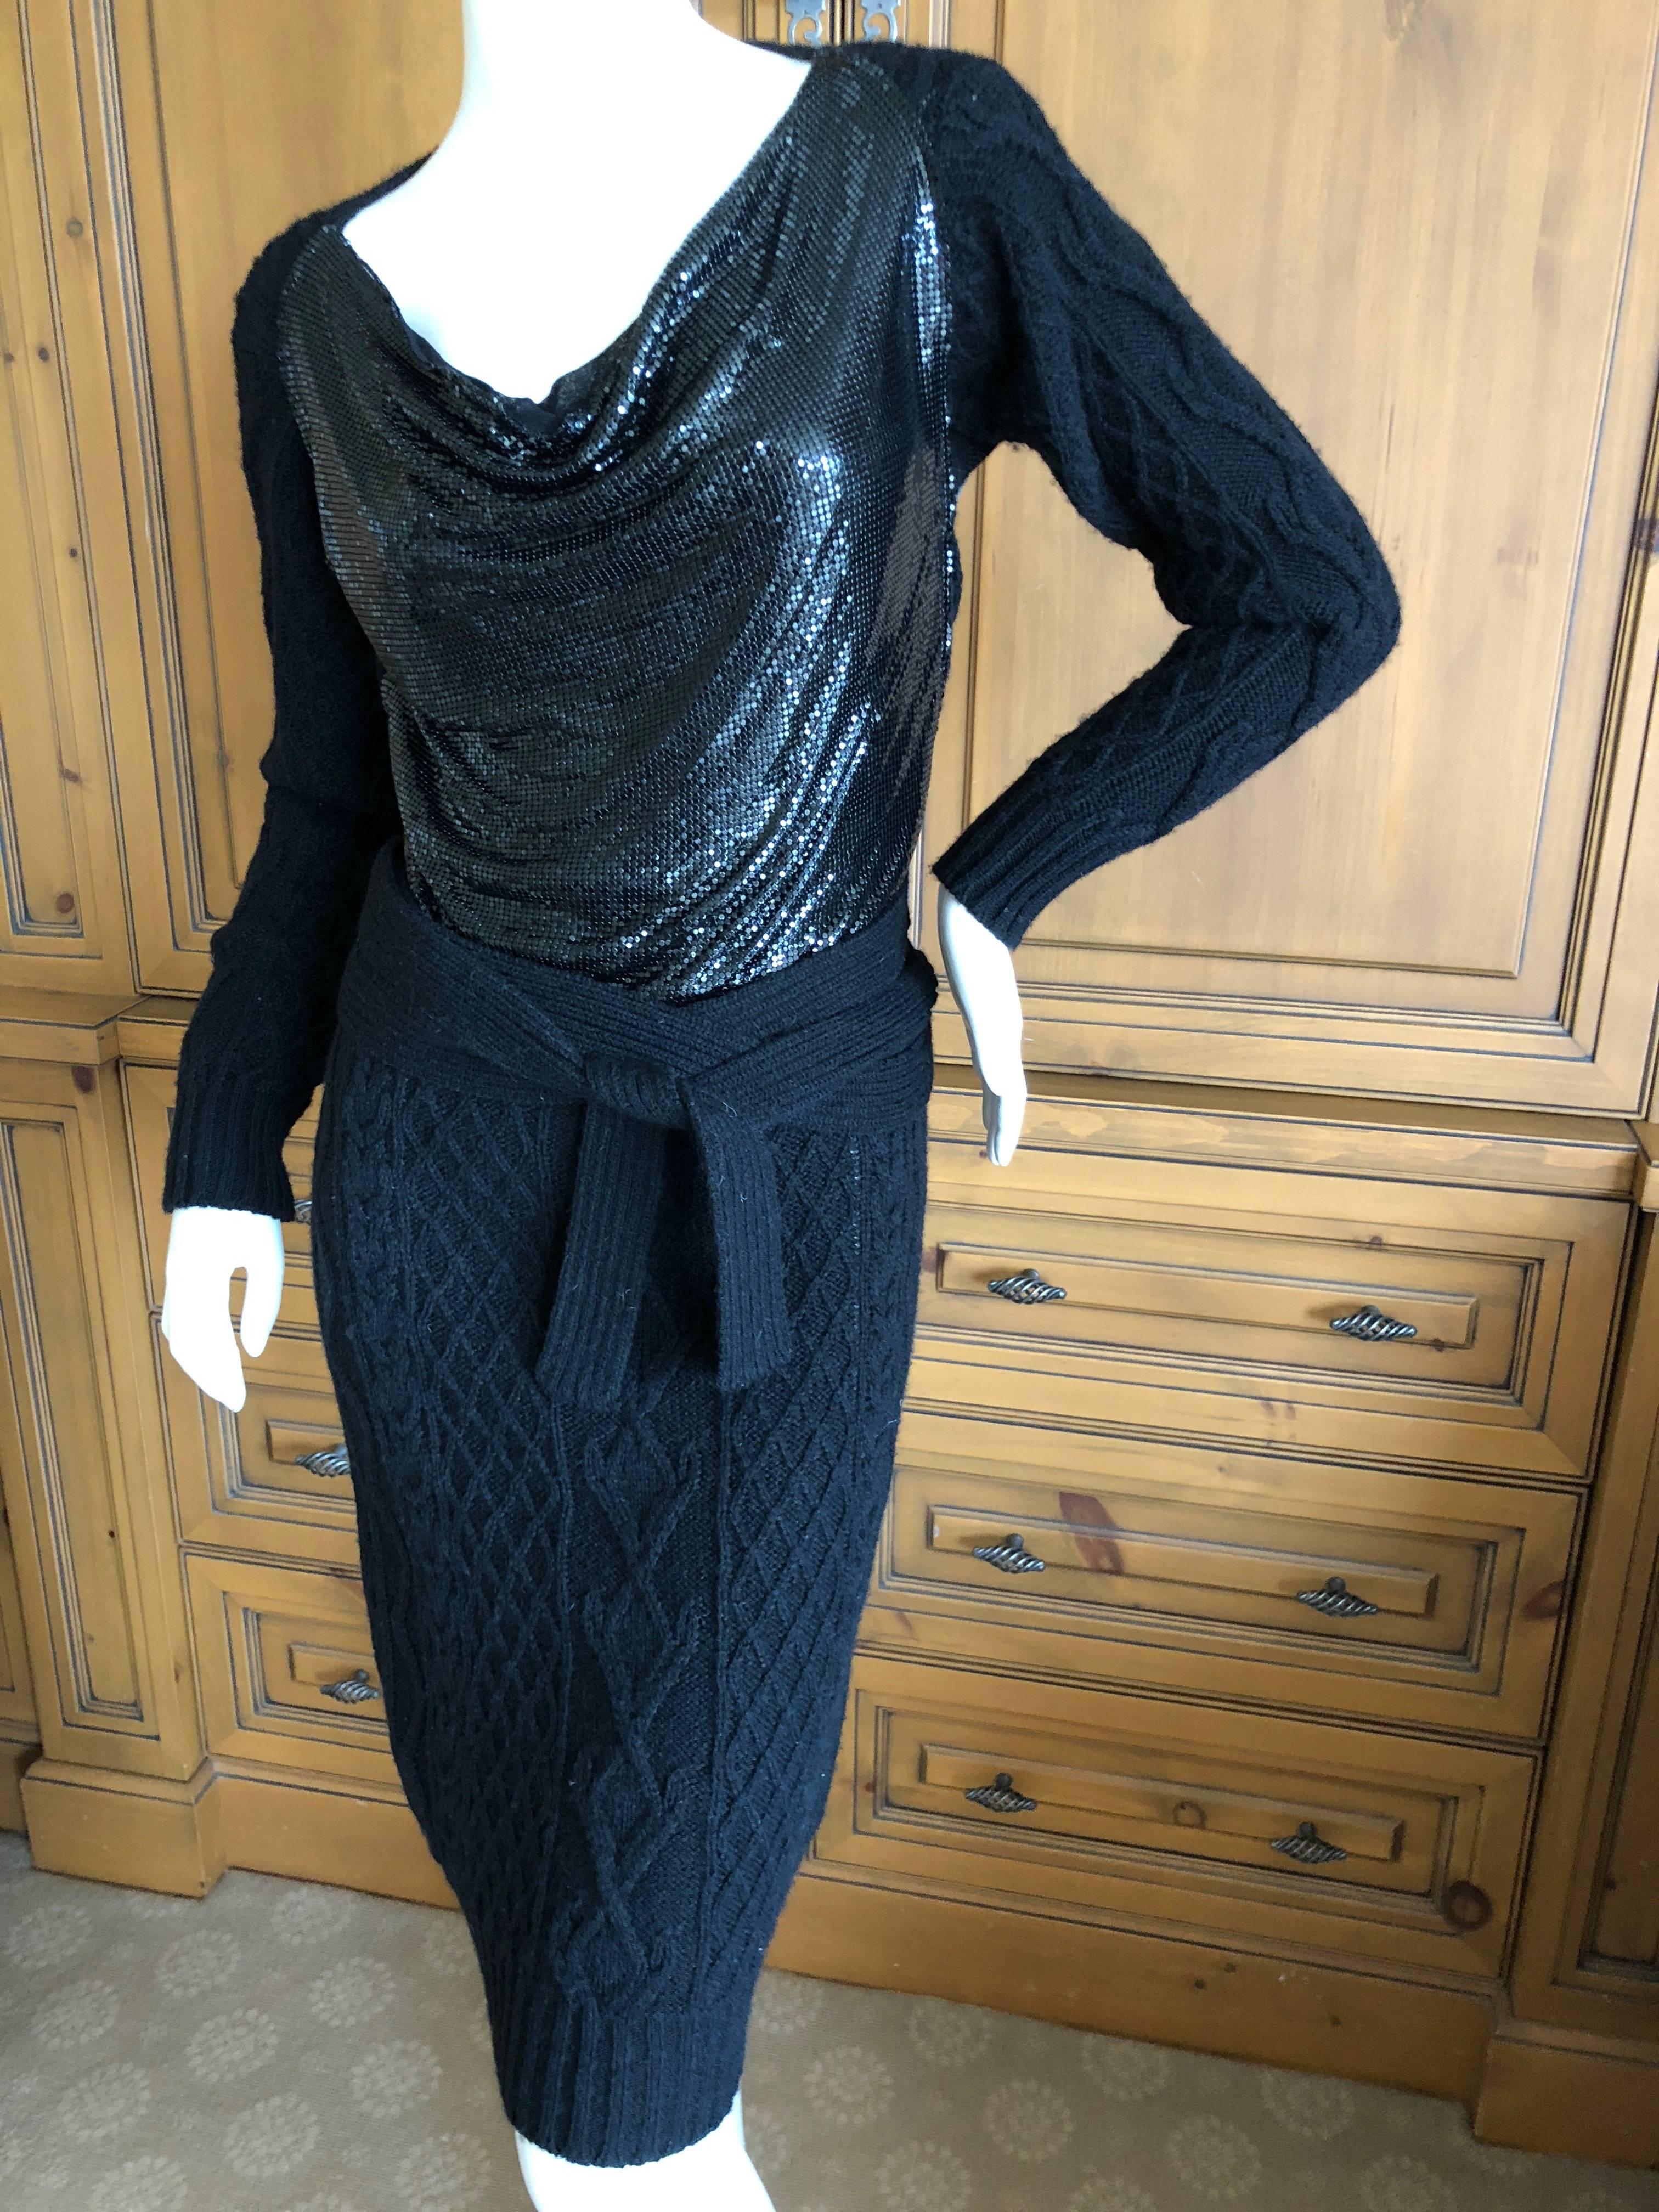 Wonderful early Jean Paul Gaultier Maille angora wool blend cable knit dress with a draped black enamel metal mesh front.
It is much prettier in person, this was hard to photograph well.
Size S
Bust 36